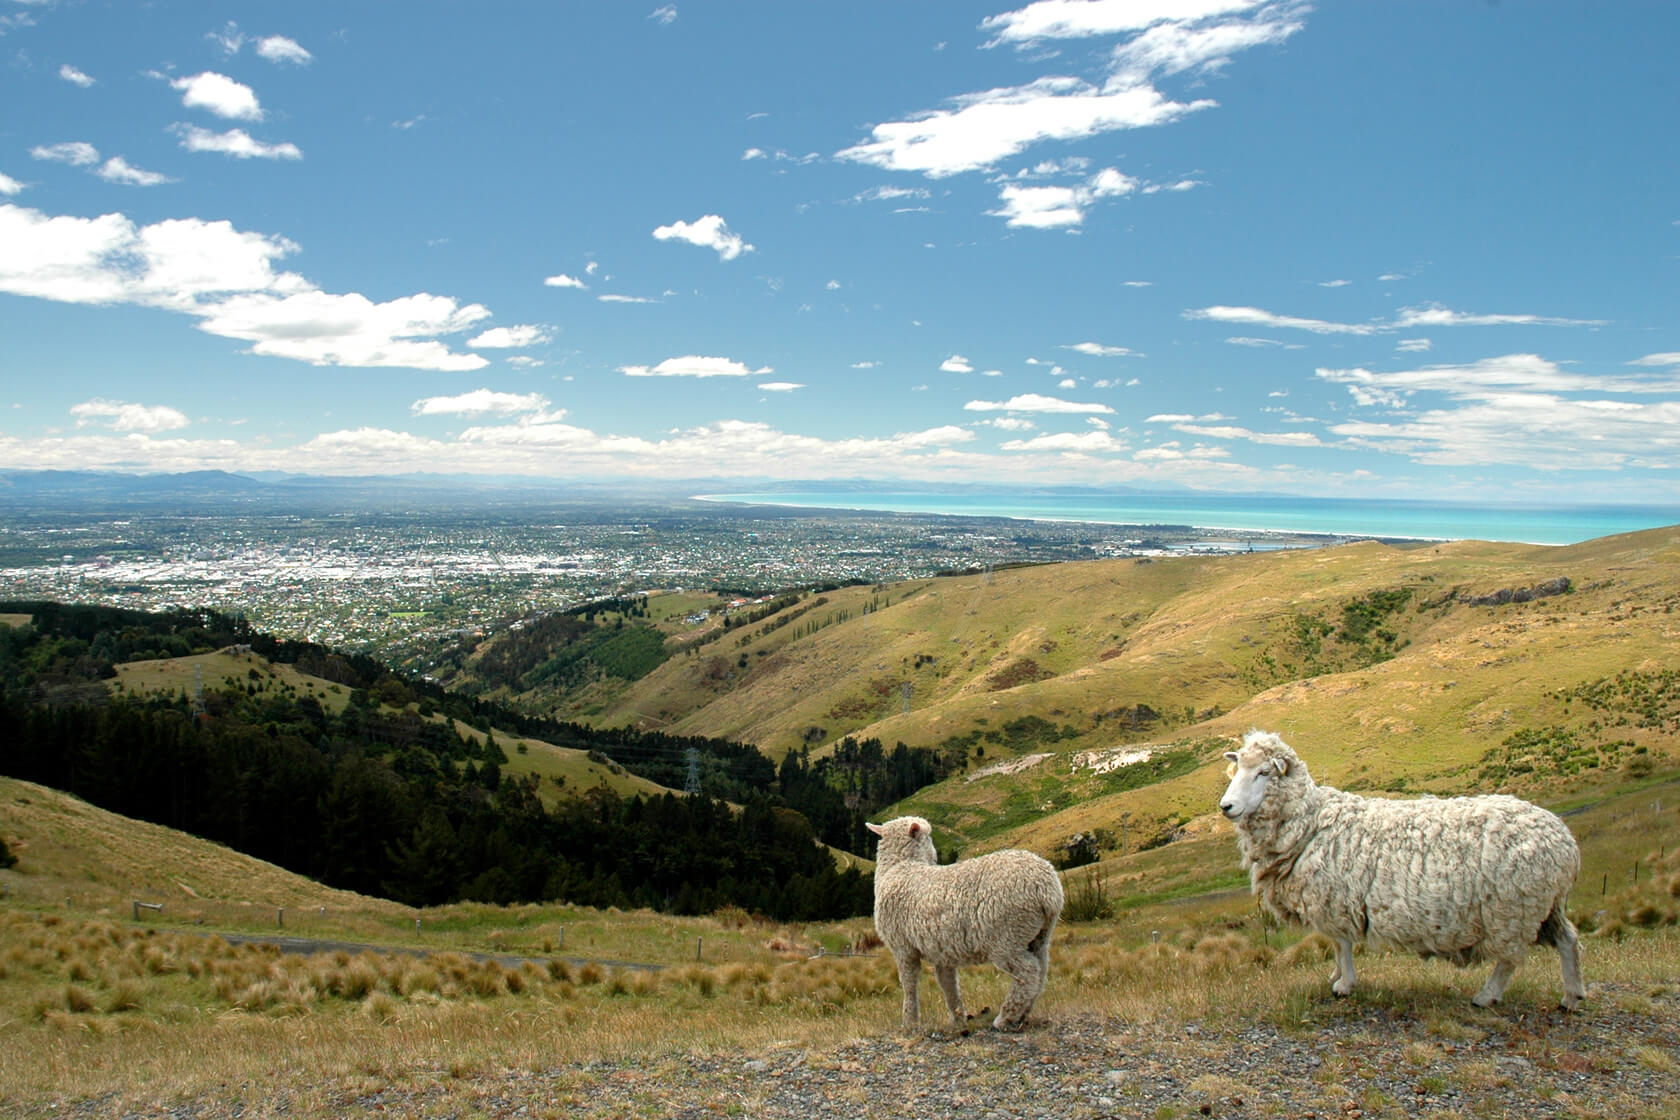 Two sheep on a hill overlooking Christchurch, New Zealand